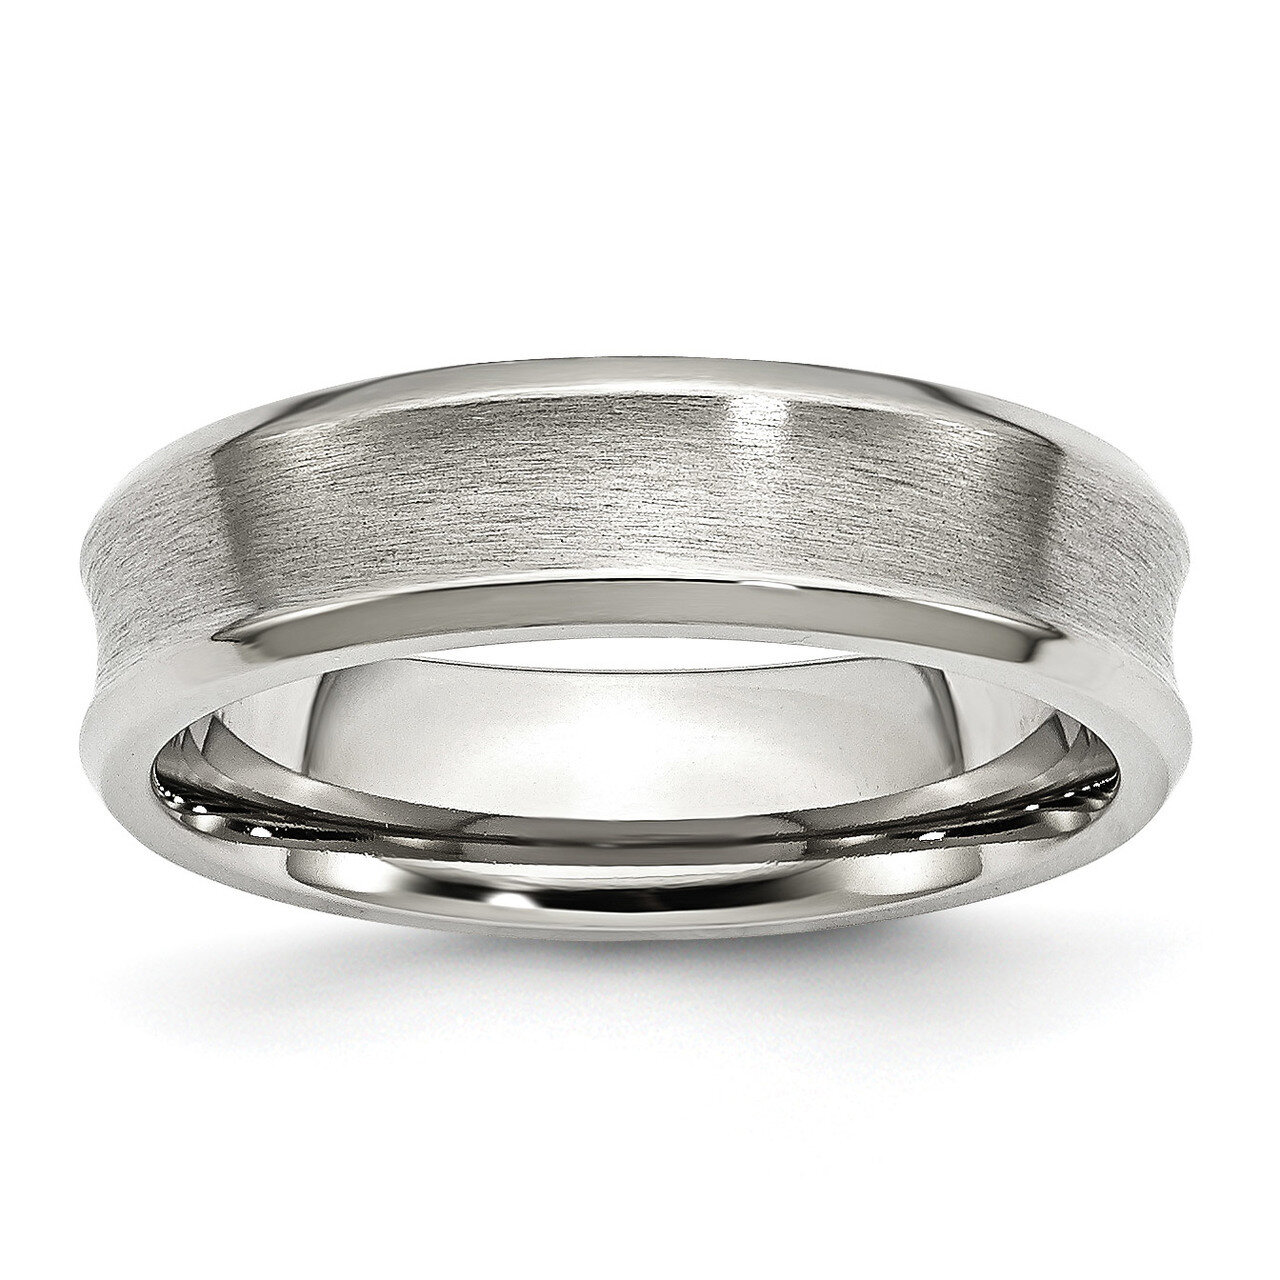 Concave Beveled Edge 6mm Brushed Polished Band Stainless Steel SR89